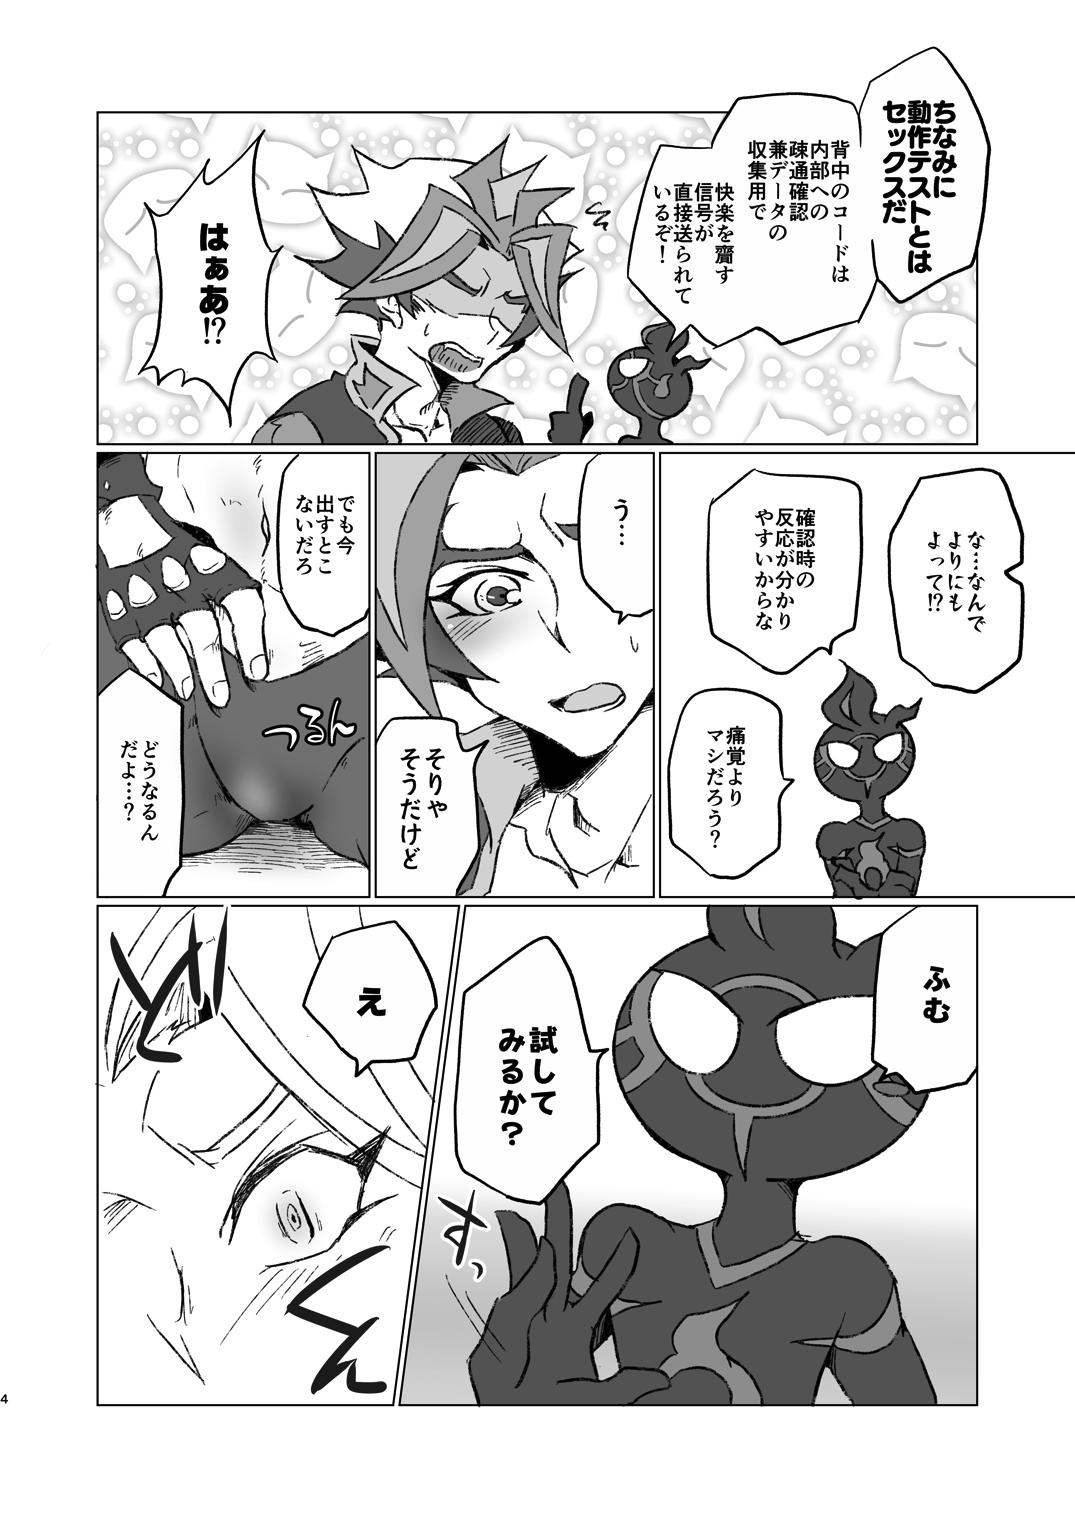 Culo Grande A little bit further - Yu-gi-oh vrains Office Sex - Page 3